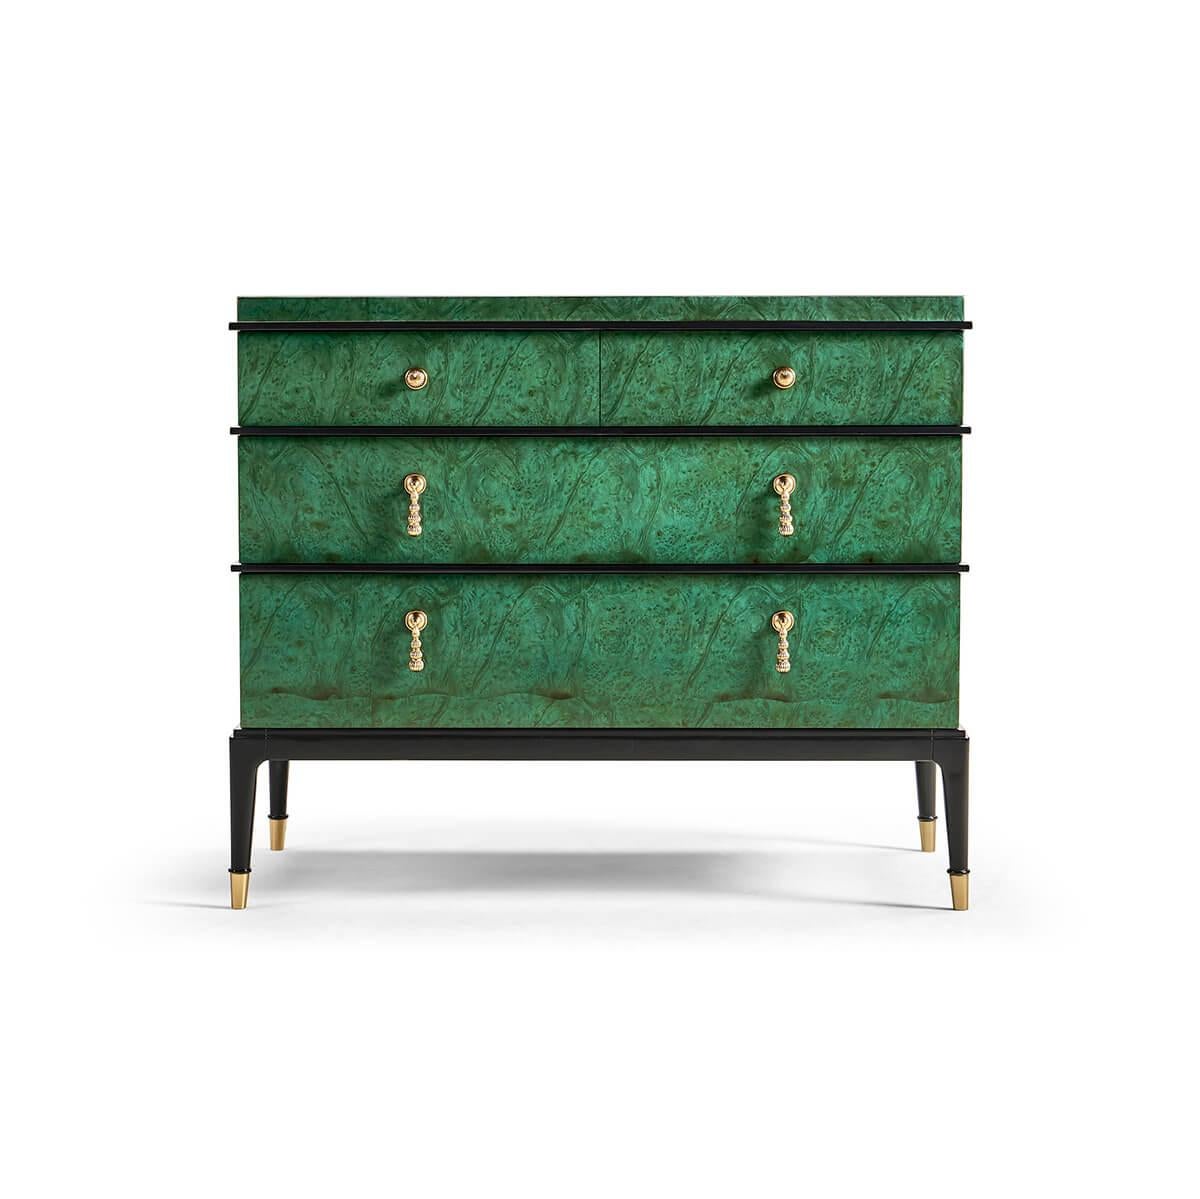 striking design with blended elements from the Art Deco and Mid-Century modern styles. With a striking Emerald Green finish to the burl wood veneers, clean lines, bold contrasts, and minimalist elements make this a statement piece that seamlessly